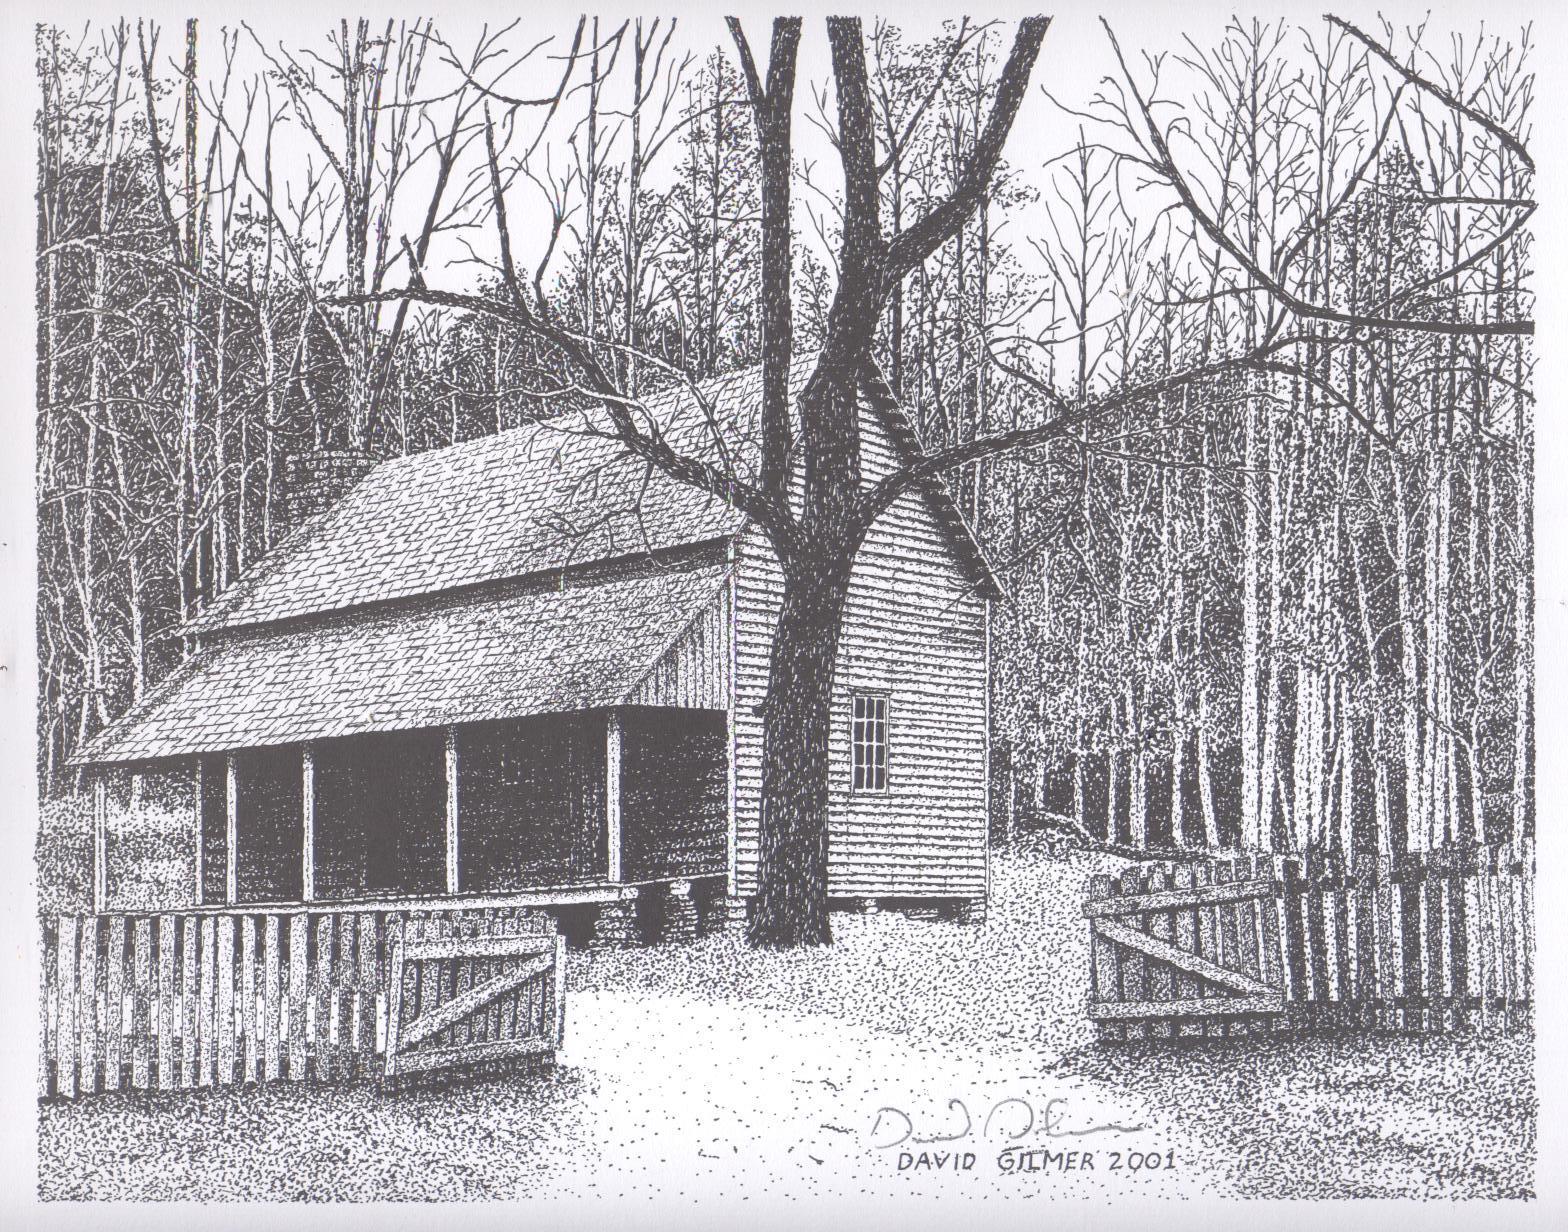 CADES COVE CABIN 1.GSMNP.LITHOGRAPH PRINT,8 X 10,LIMITED EDITION.FREE SHIPPING